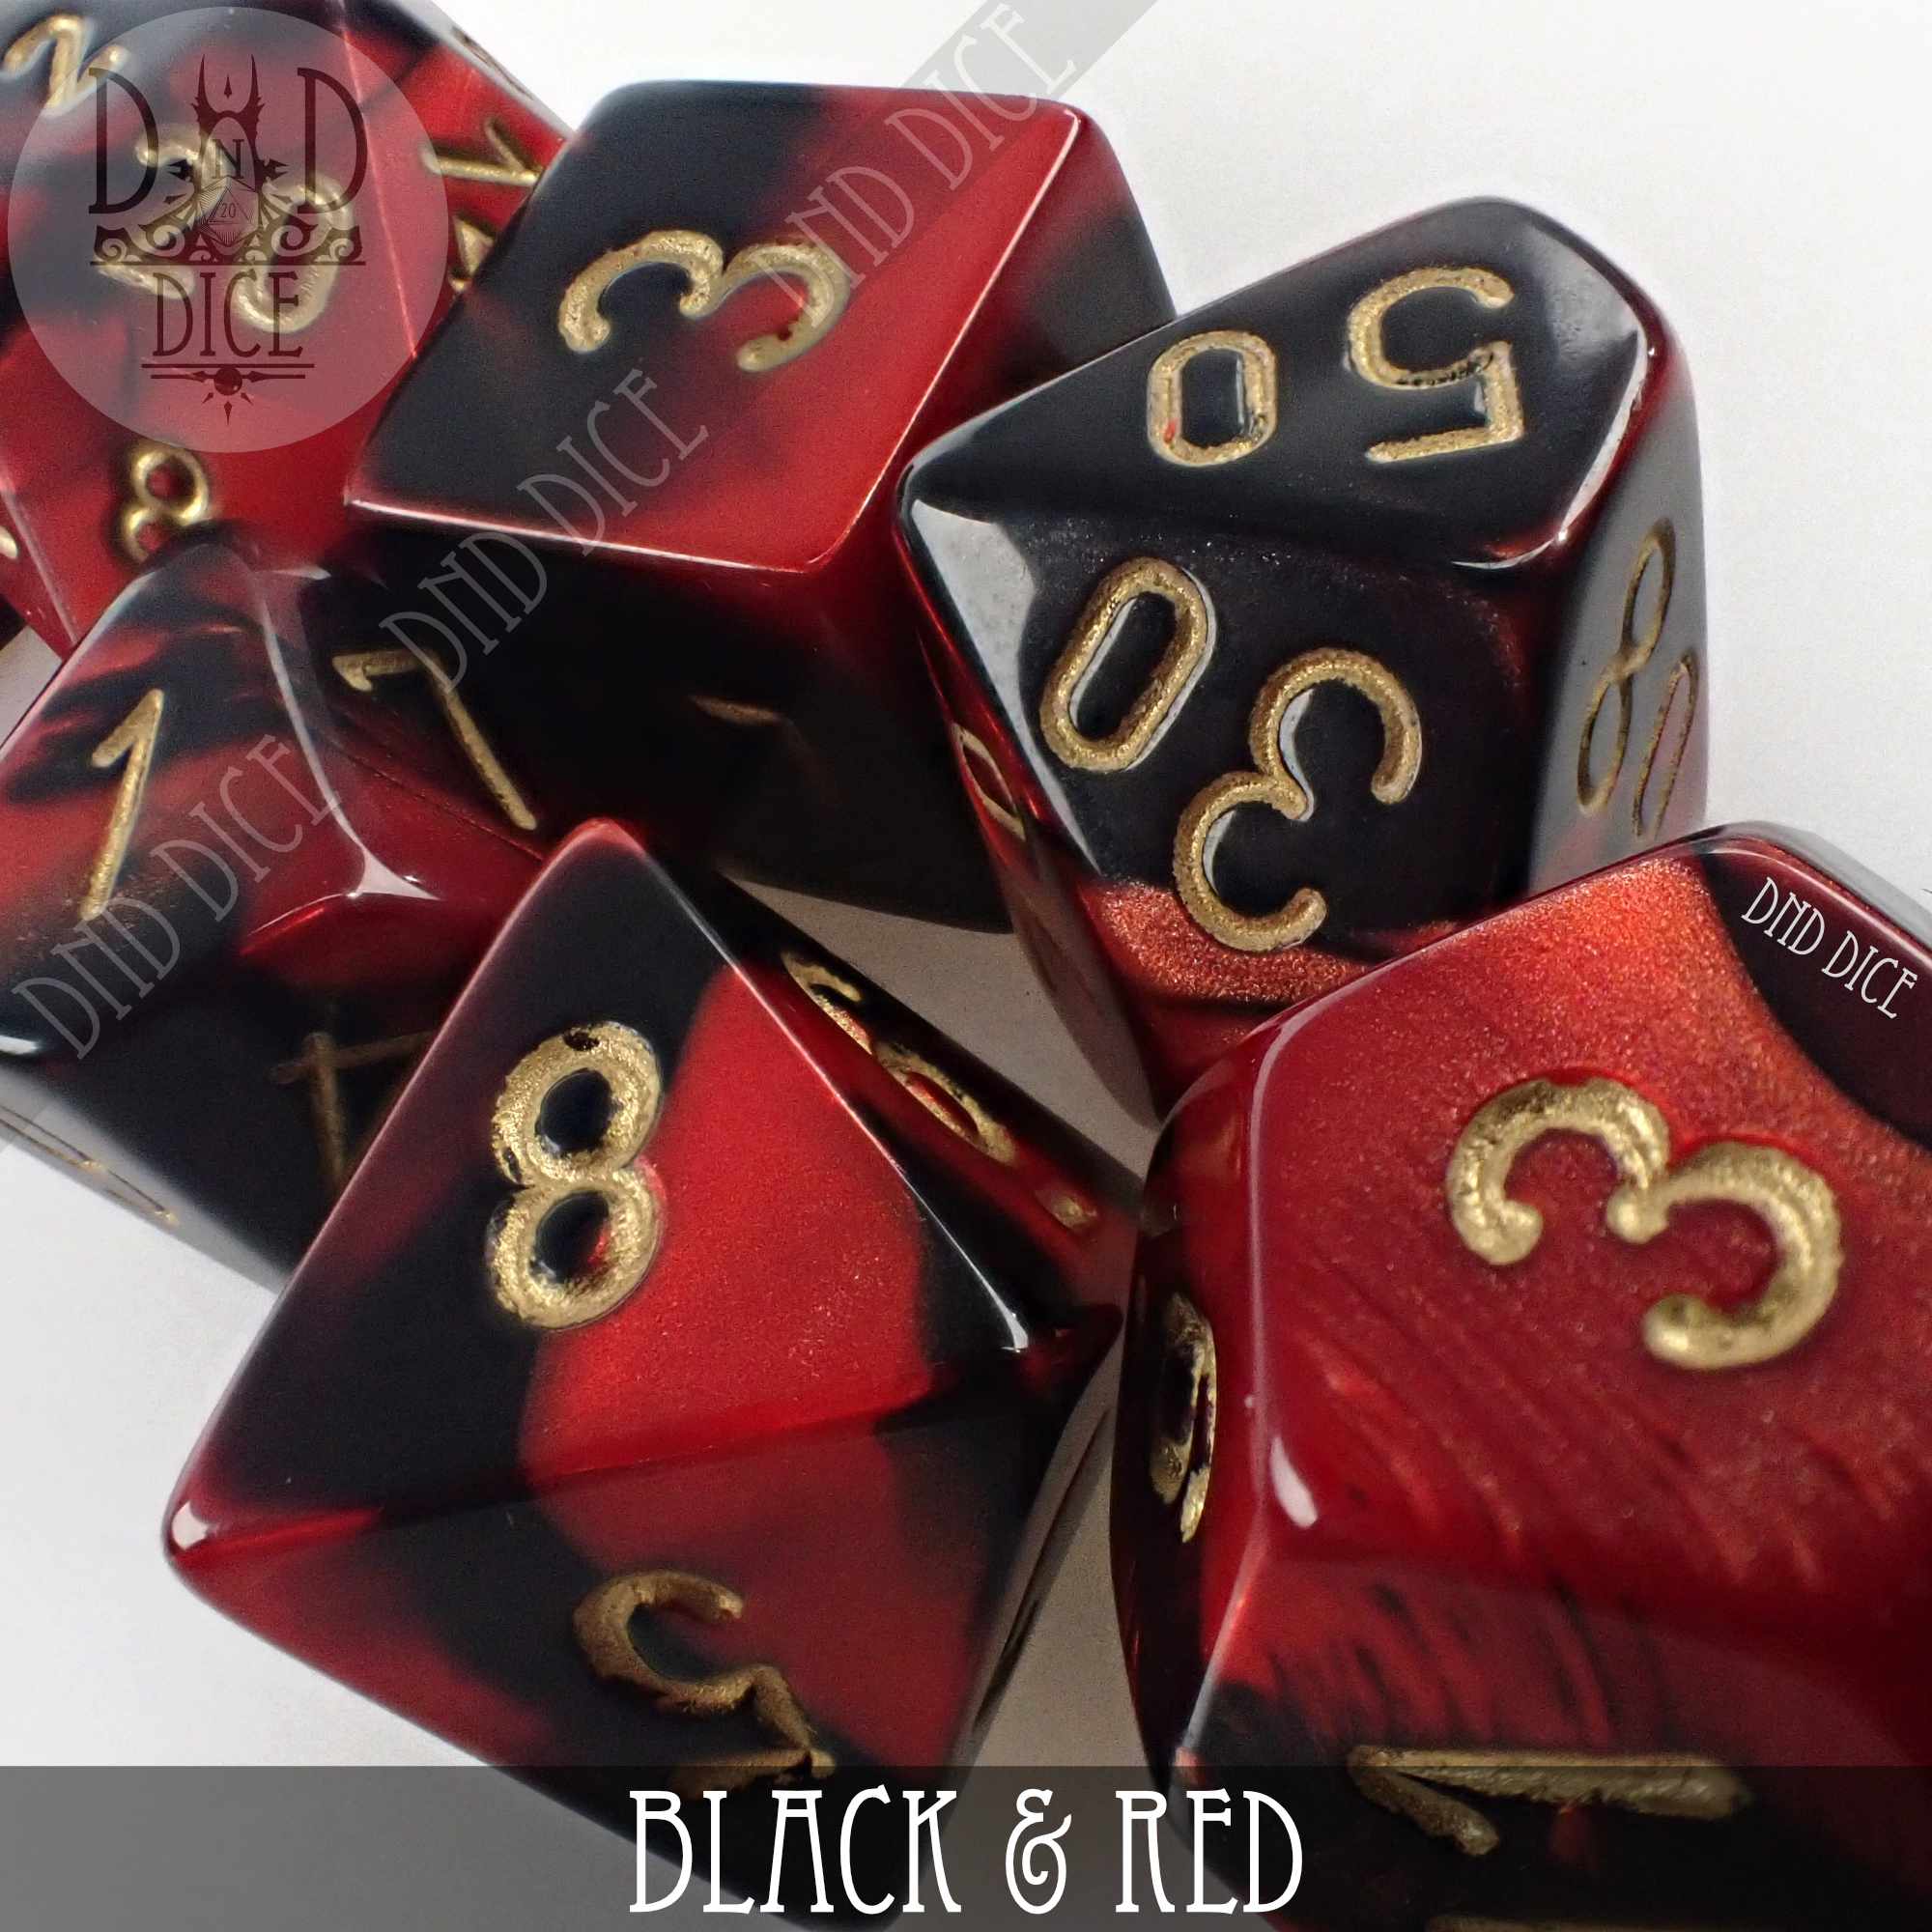 4 Sided Gemini Dice (d4) from Chessex